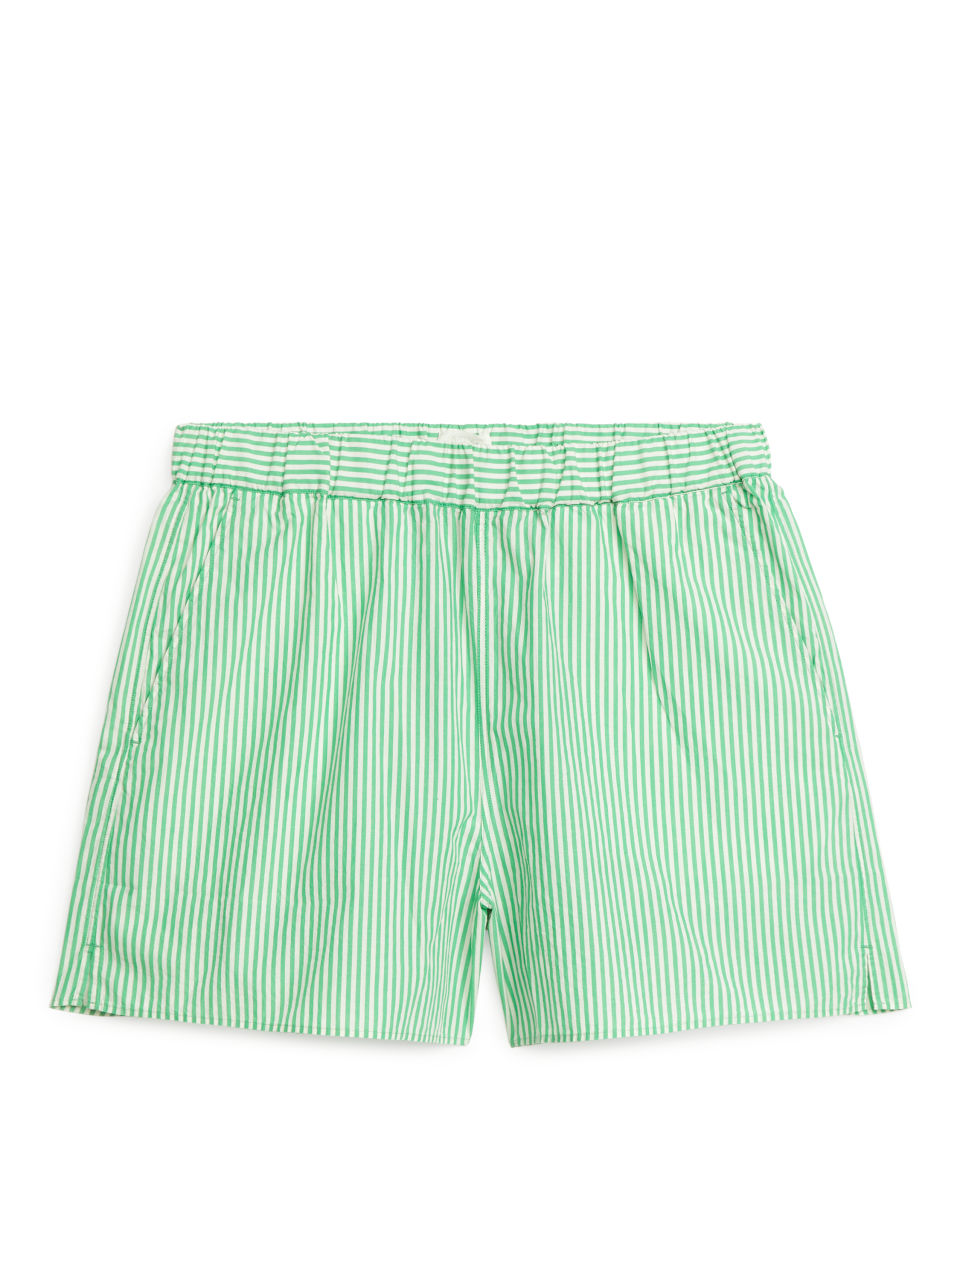 14 Best Summer Co-Ords for Women | Who What Wear UK